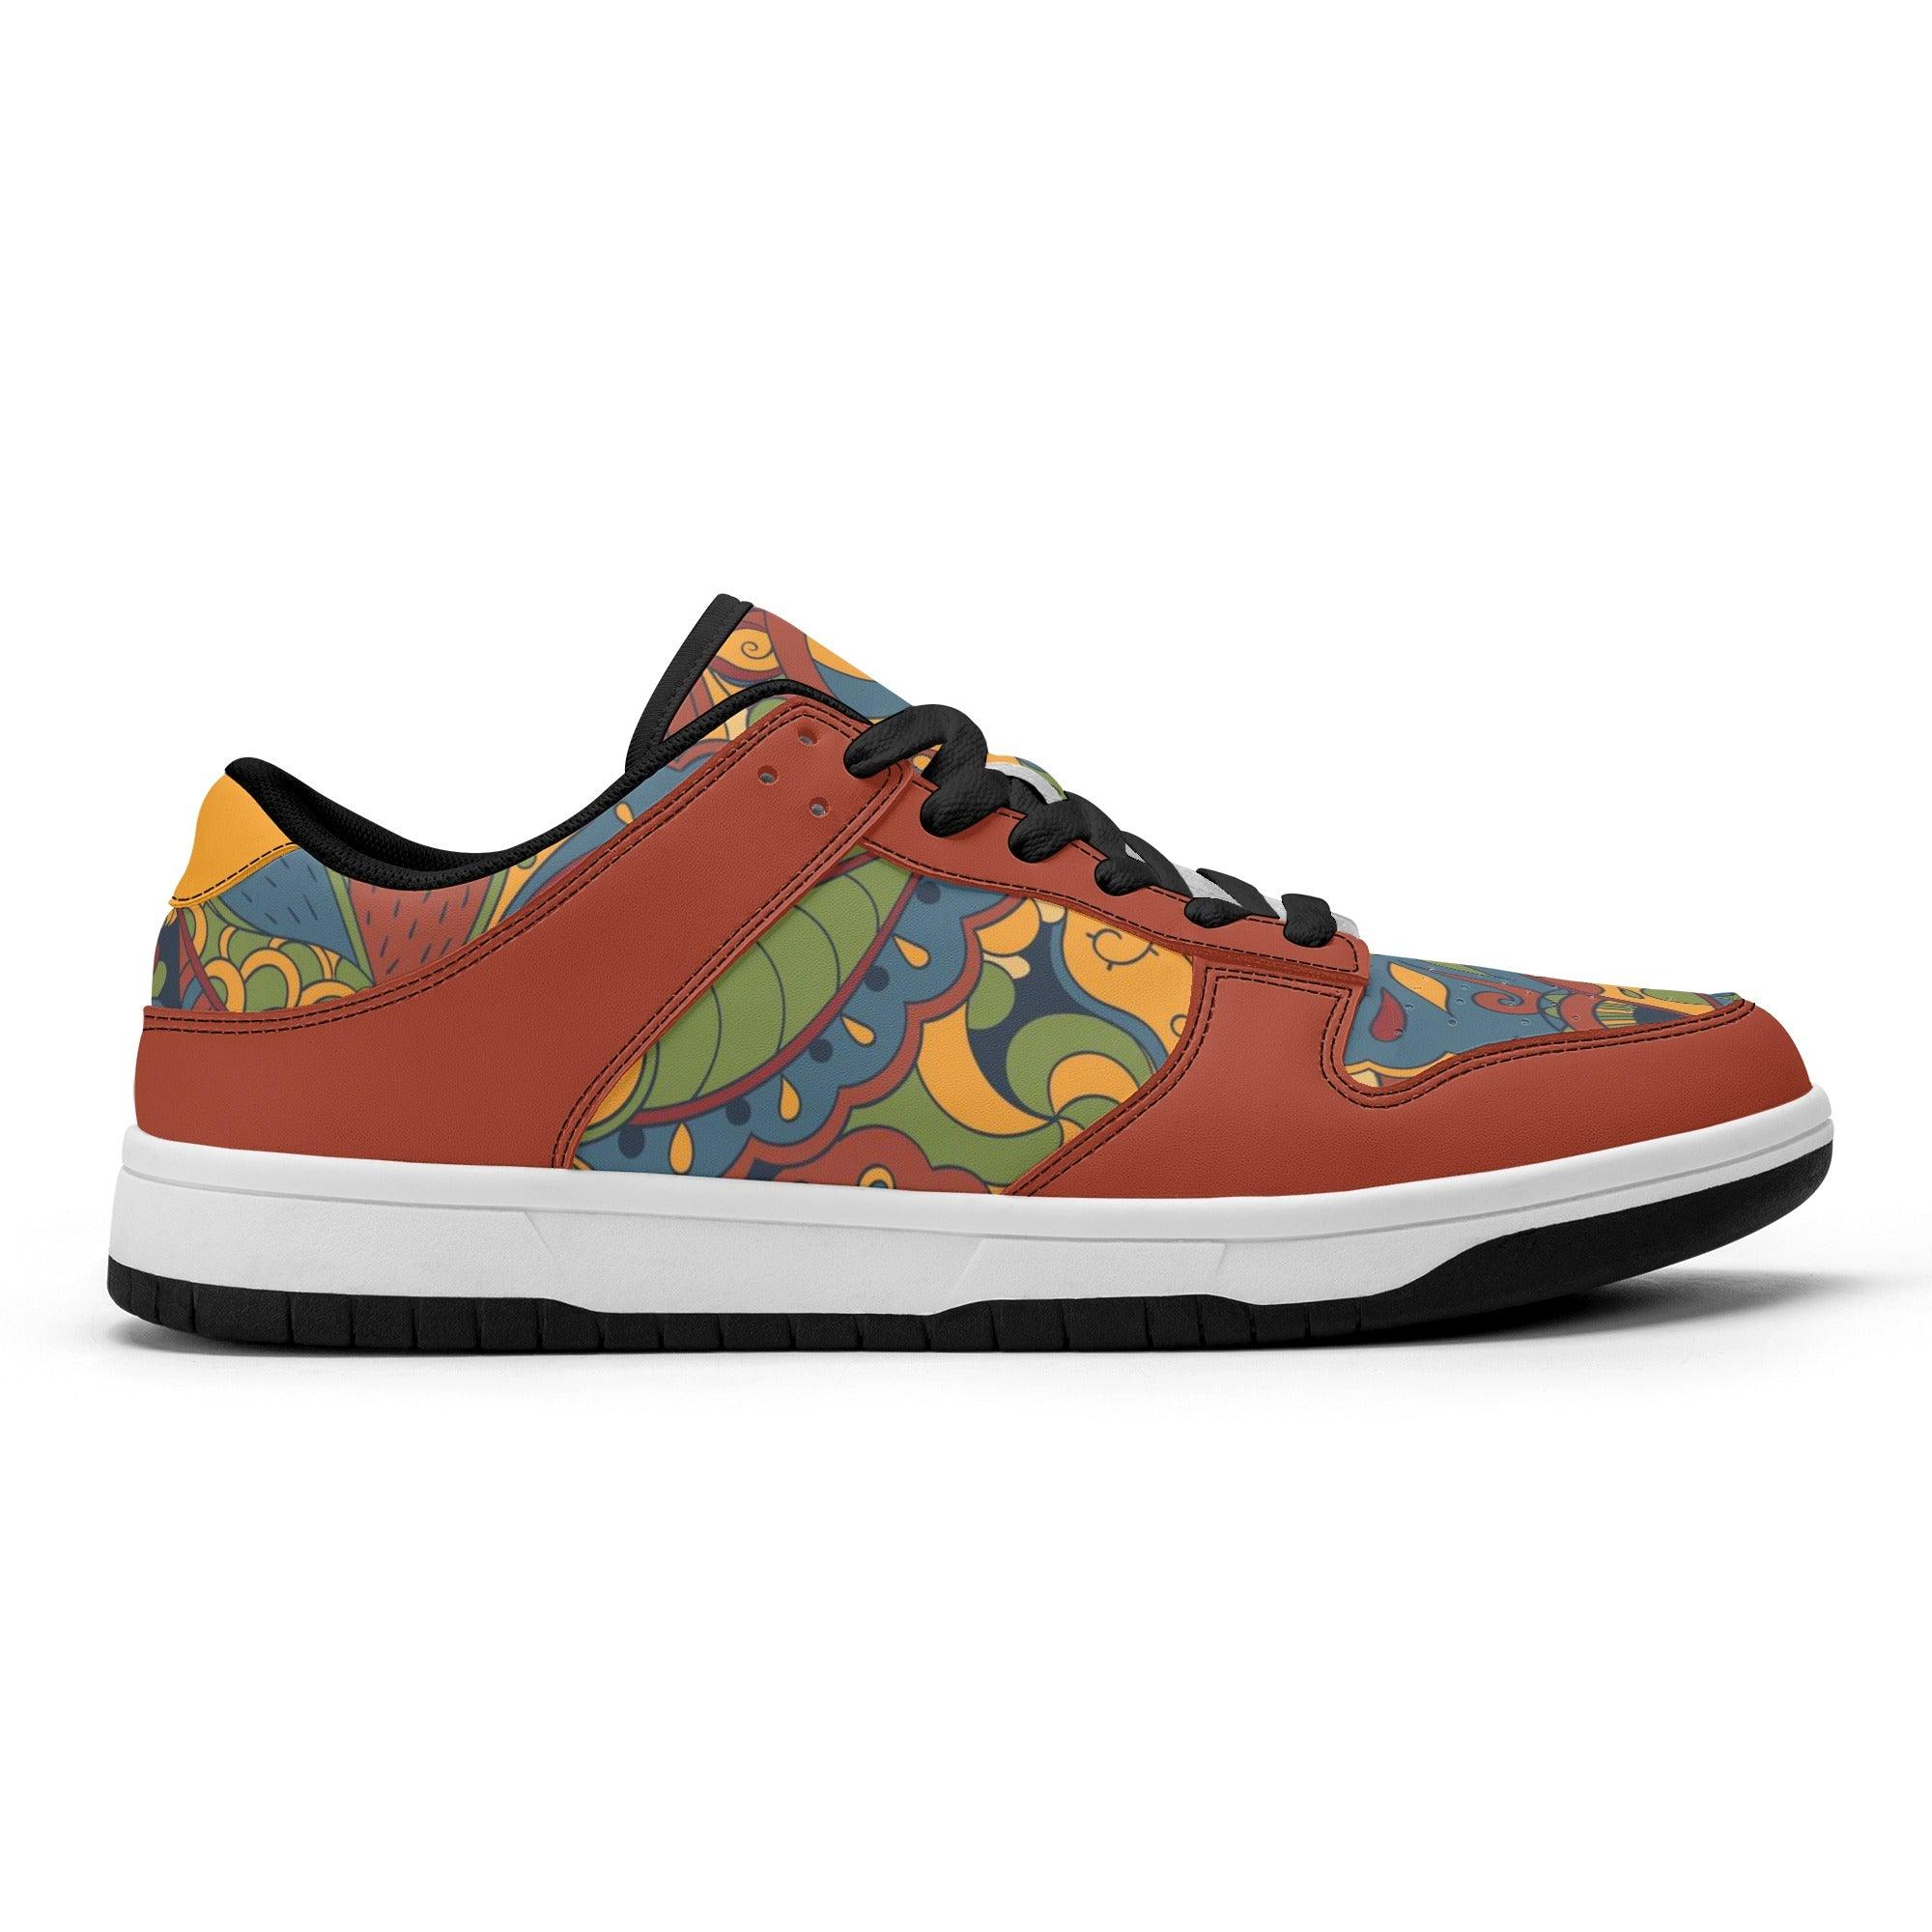 Ebisa Mixed Media Low Top Sneakers - Blissfully Brand